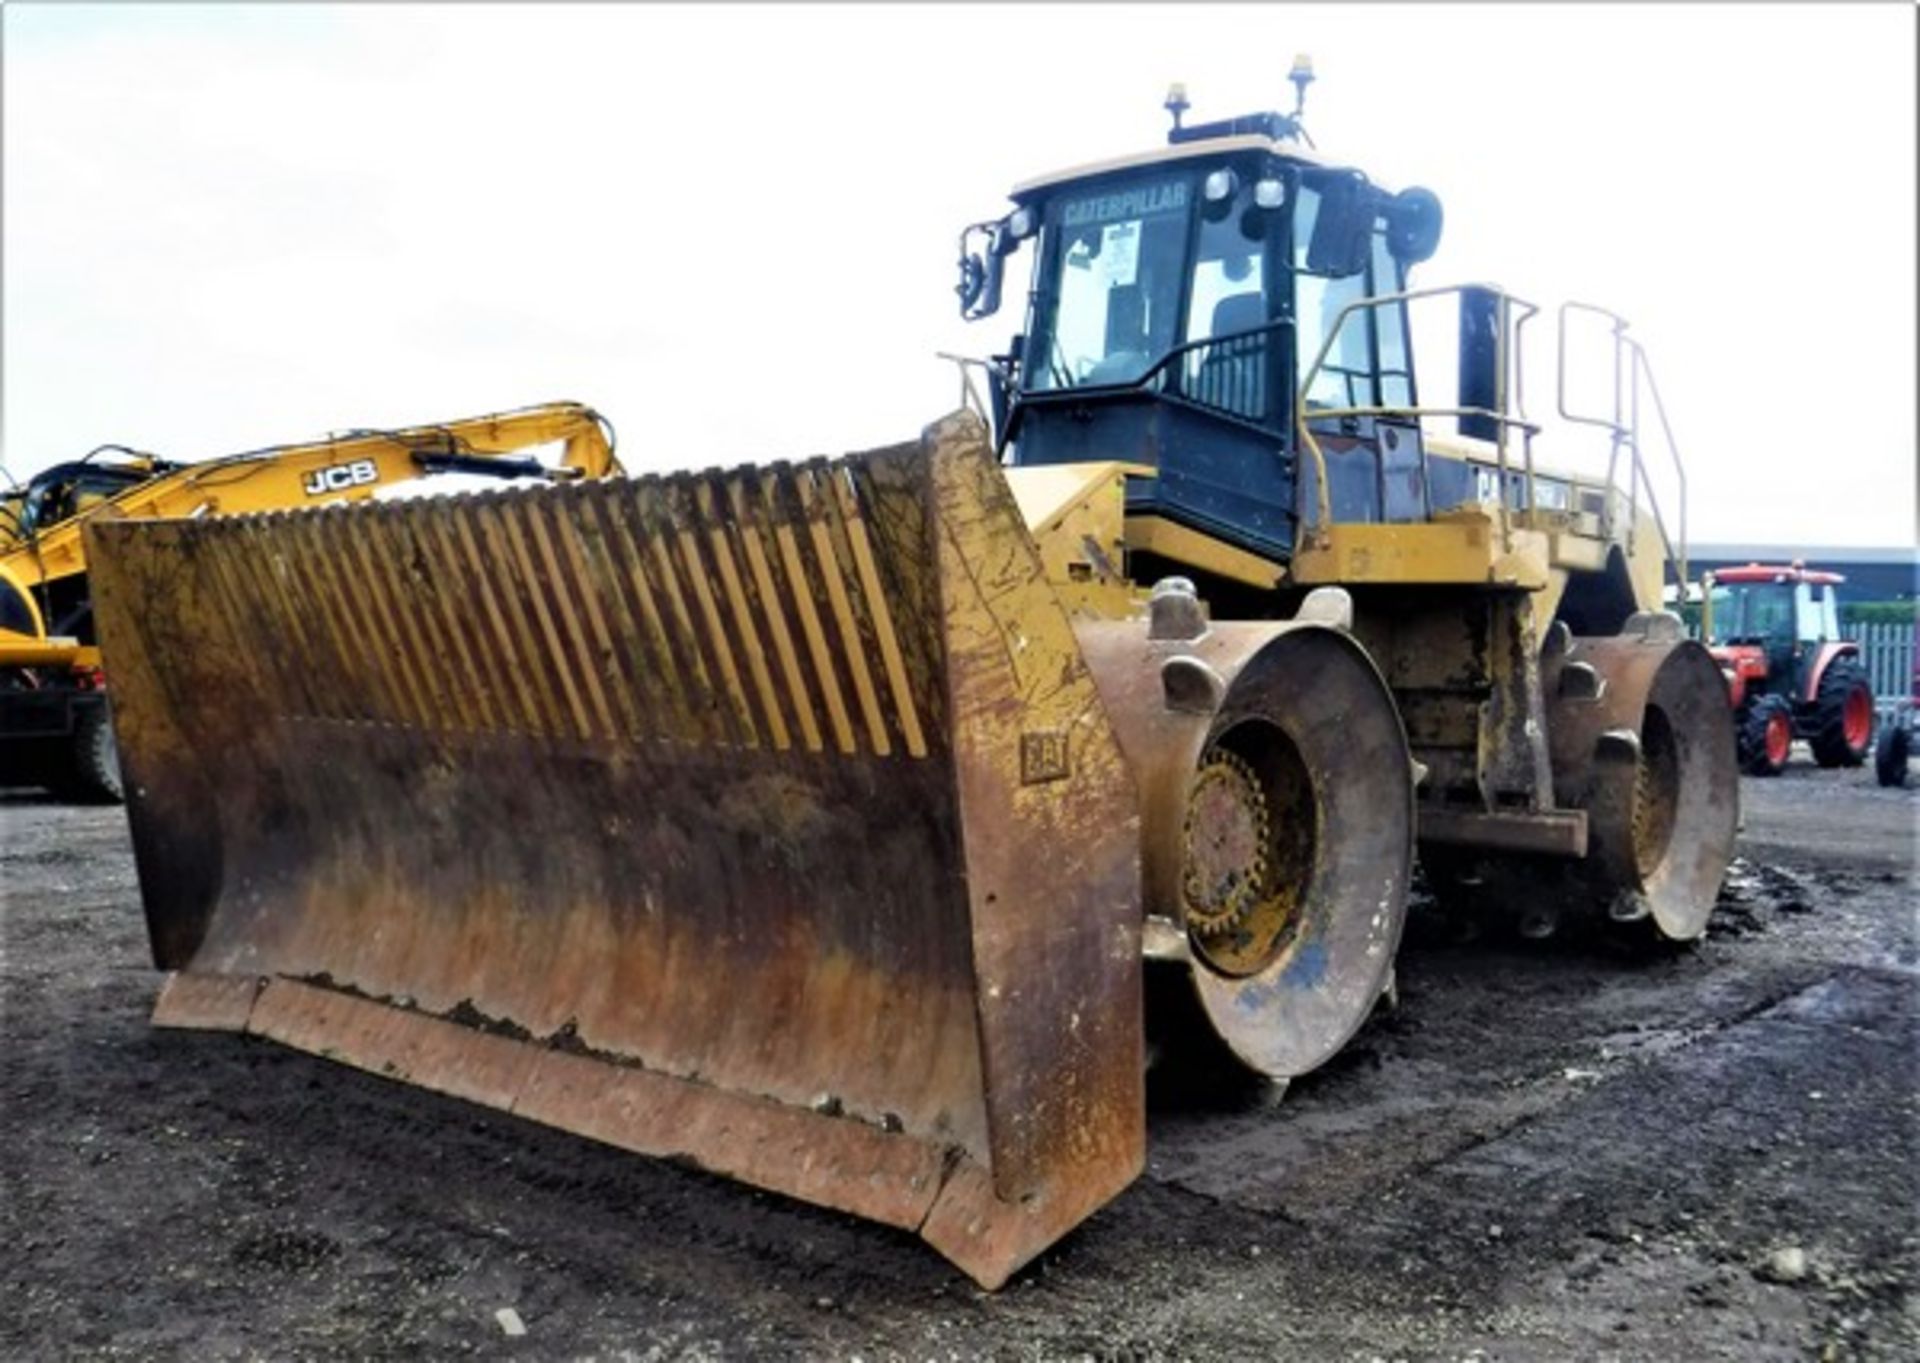 2010 CATERPILLAR 826H landfill compactor c/w service history folder, original invoice and other rele - Image 12 of 24